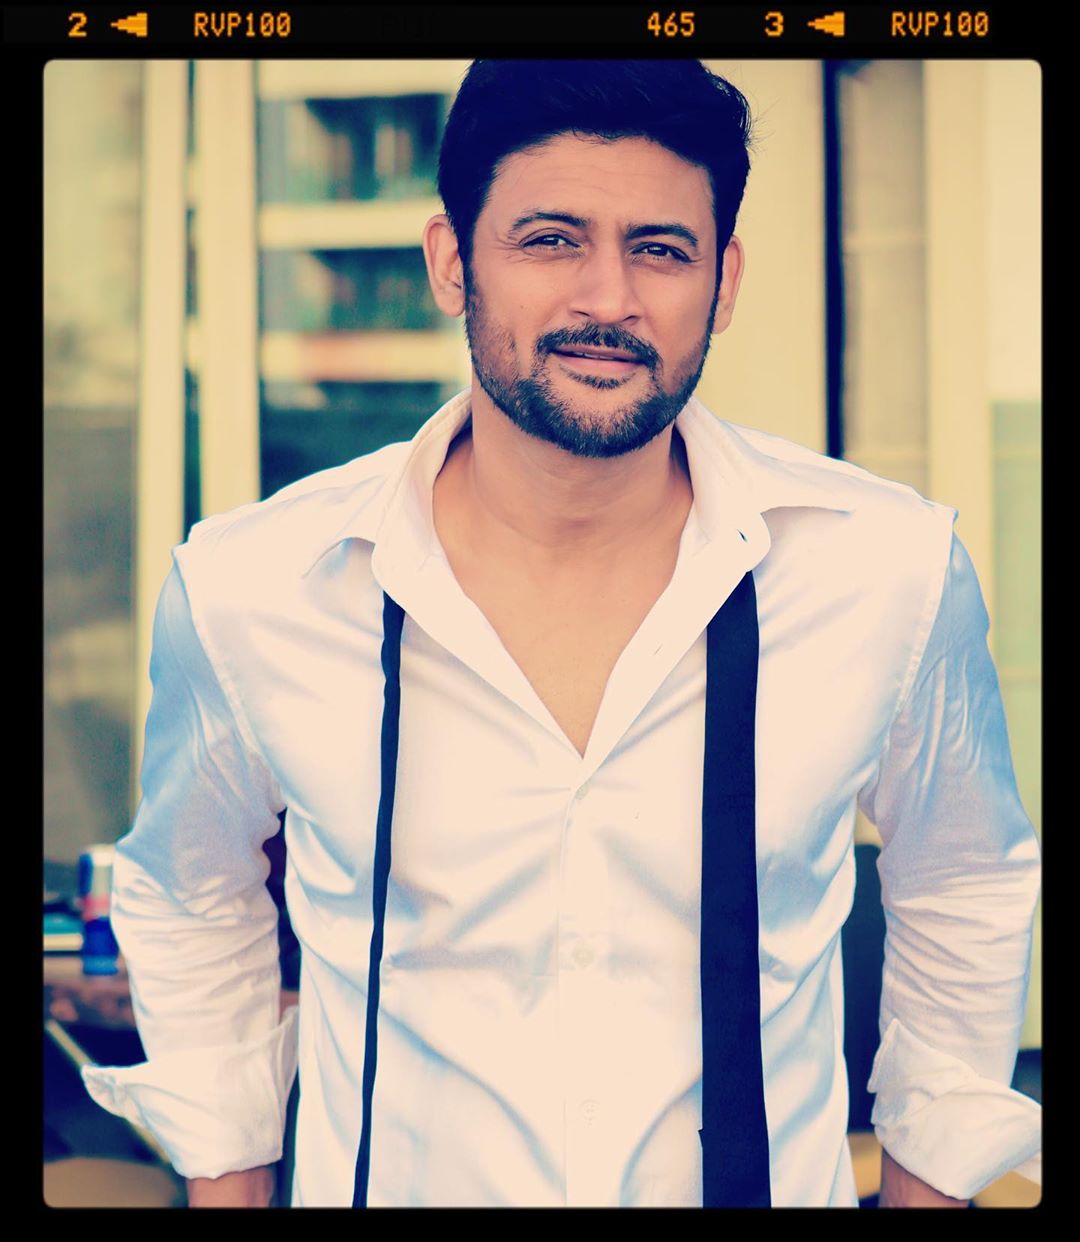 Shaadi Mubarak is all about women stepping out and making a mark: Manav Gohil 2